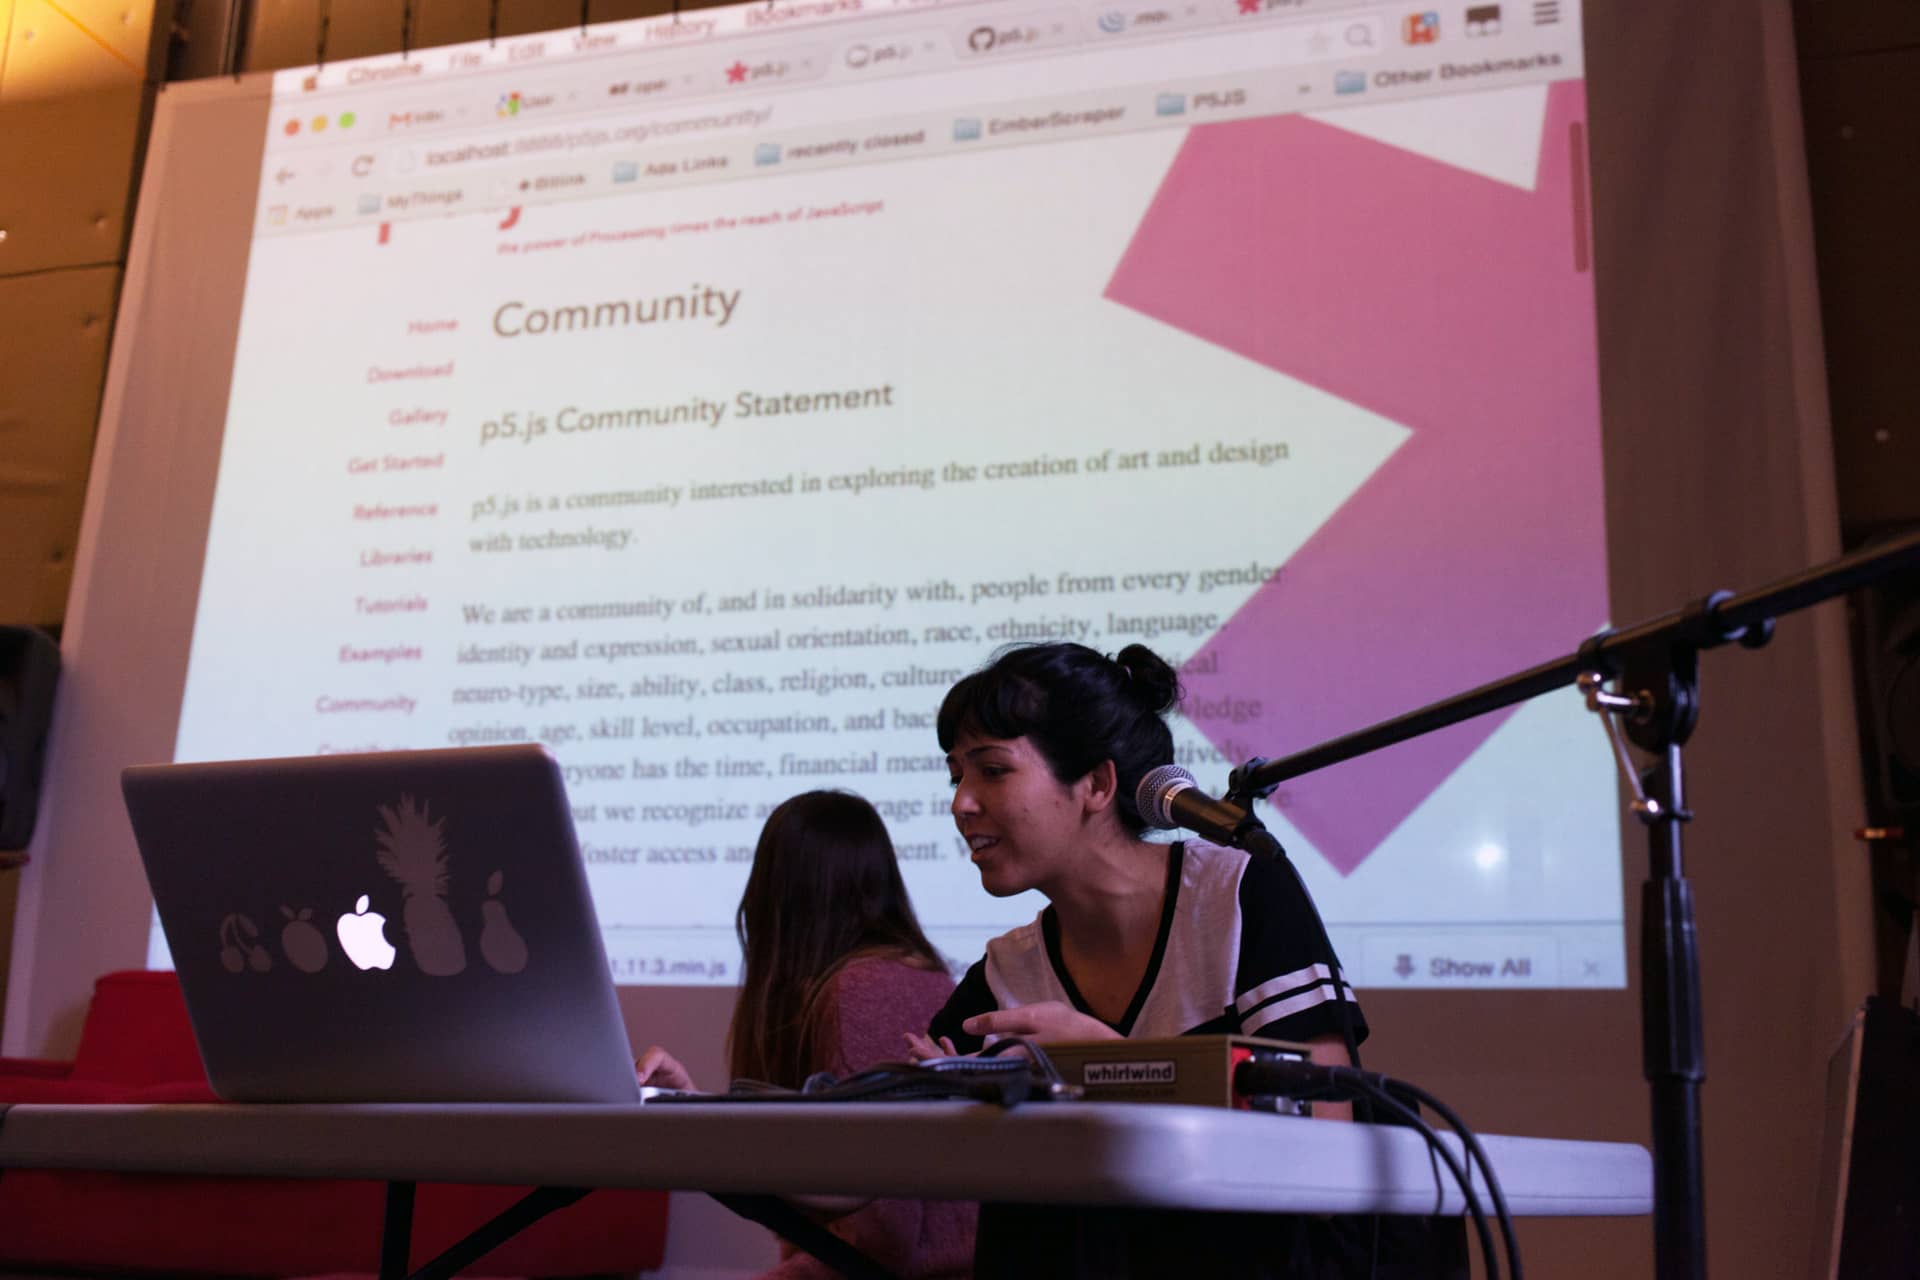 Woman presenting the p5.js community statement from her laptop"